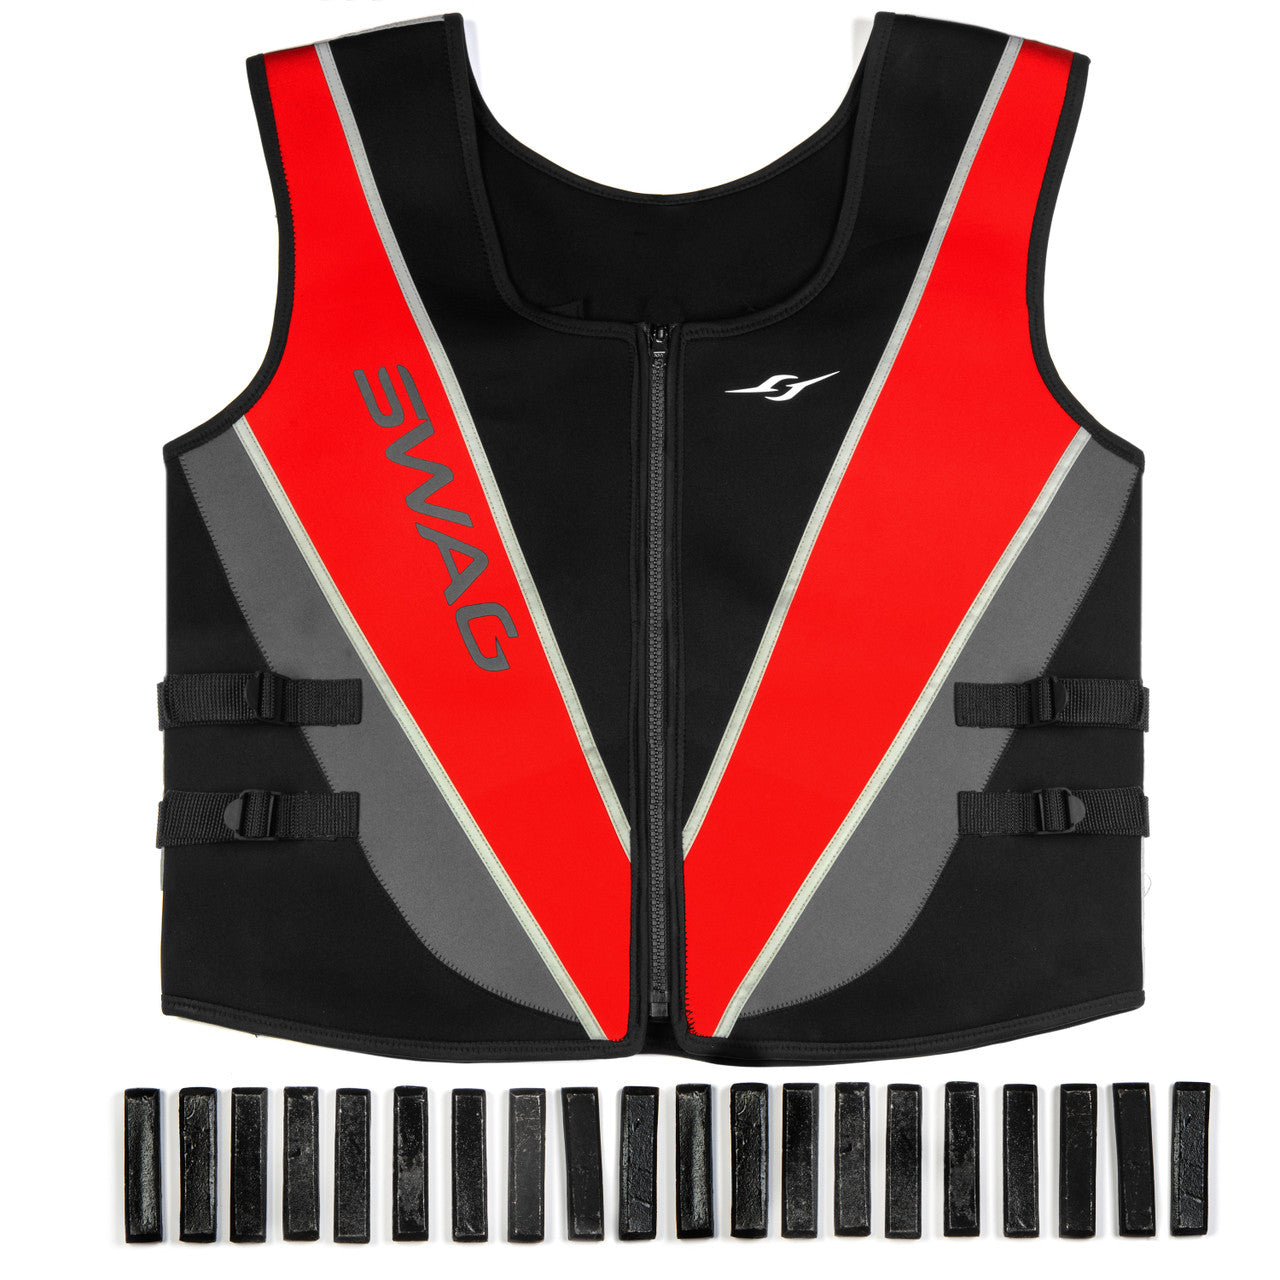 Weighted Vest for Adults